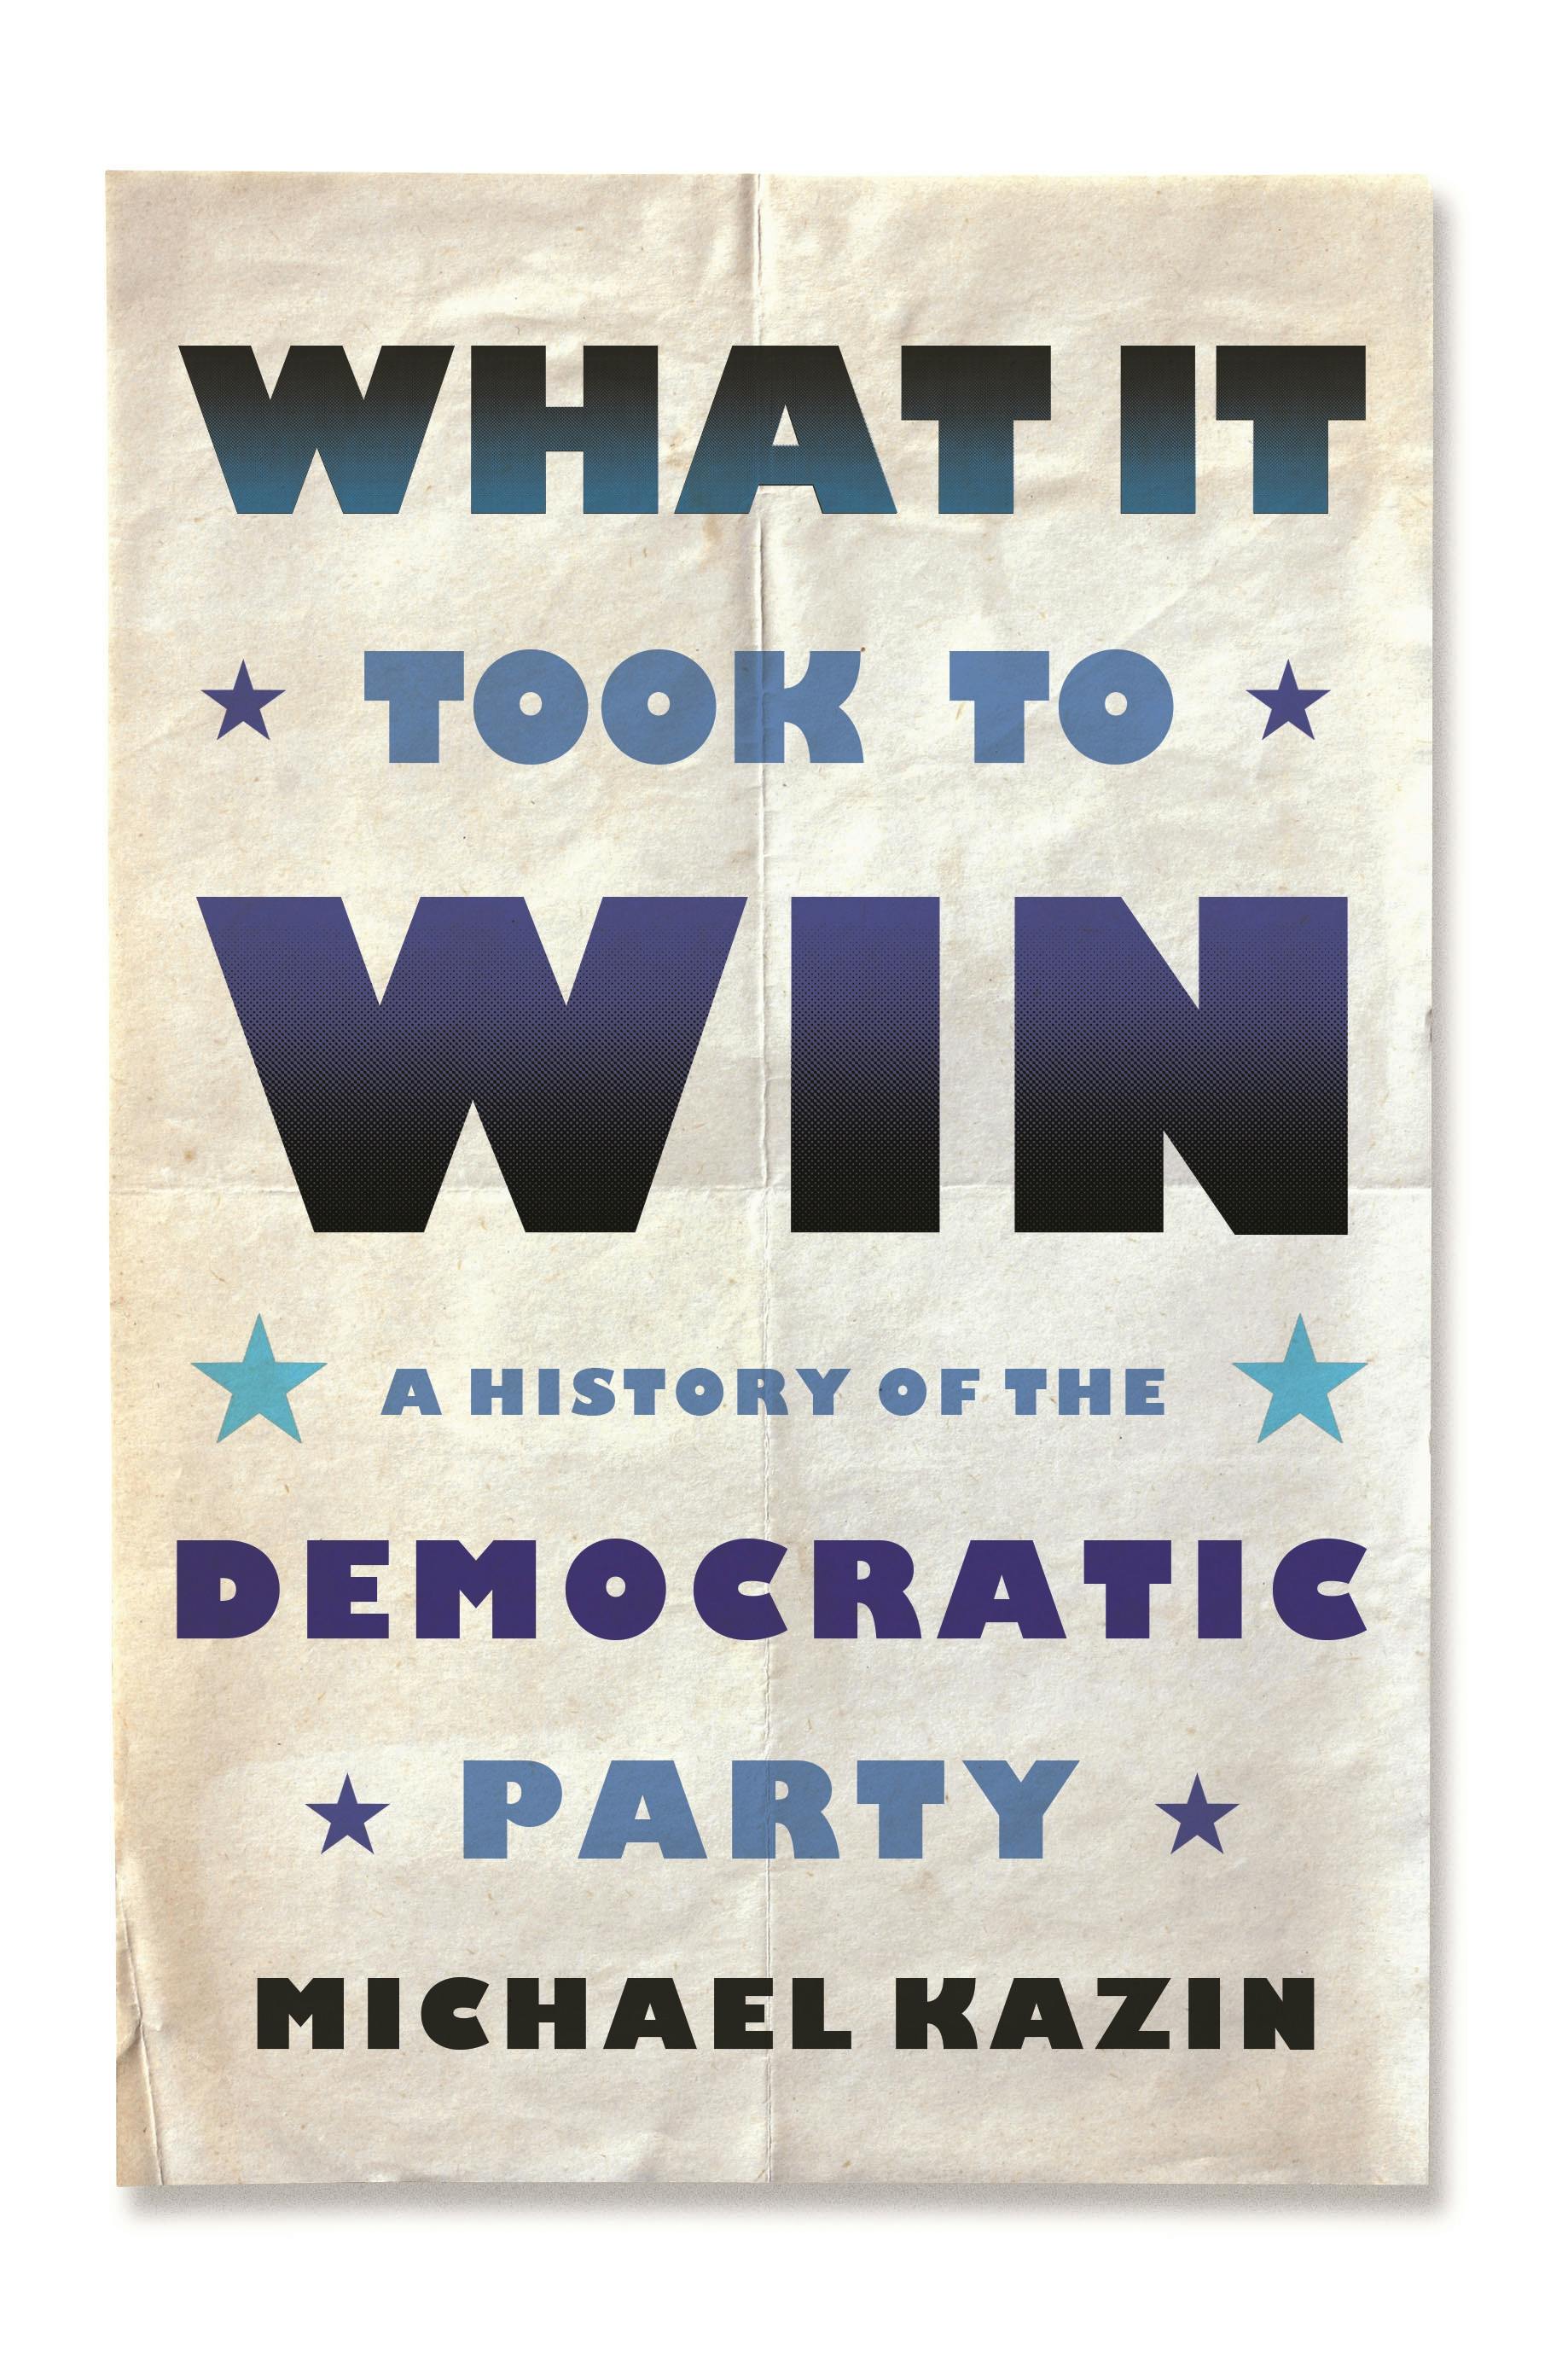 Democracy Challenged: A Look at the Historic Test on Democratic